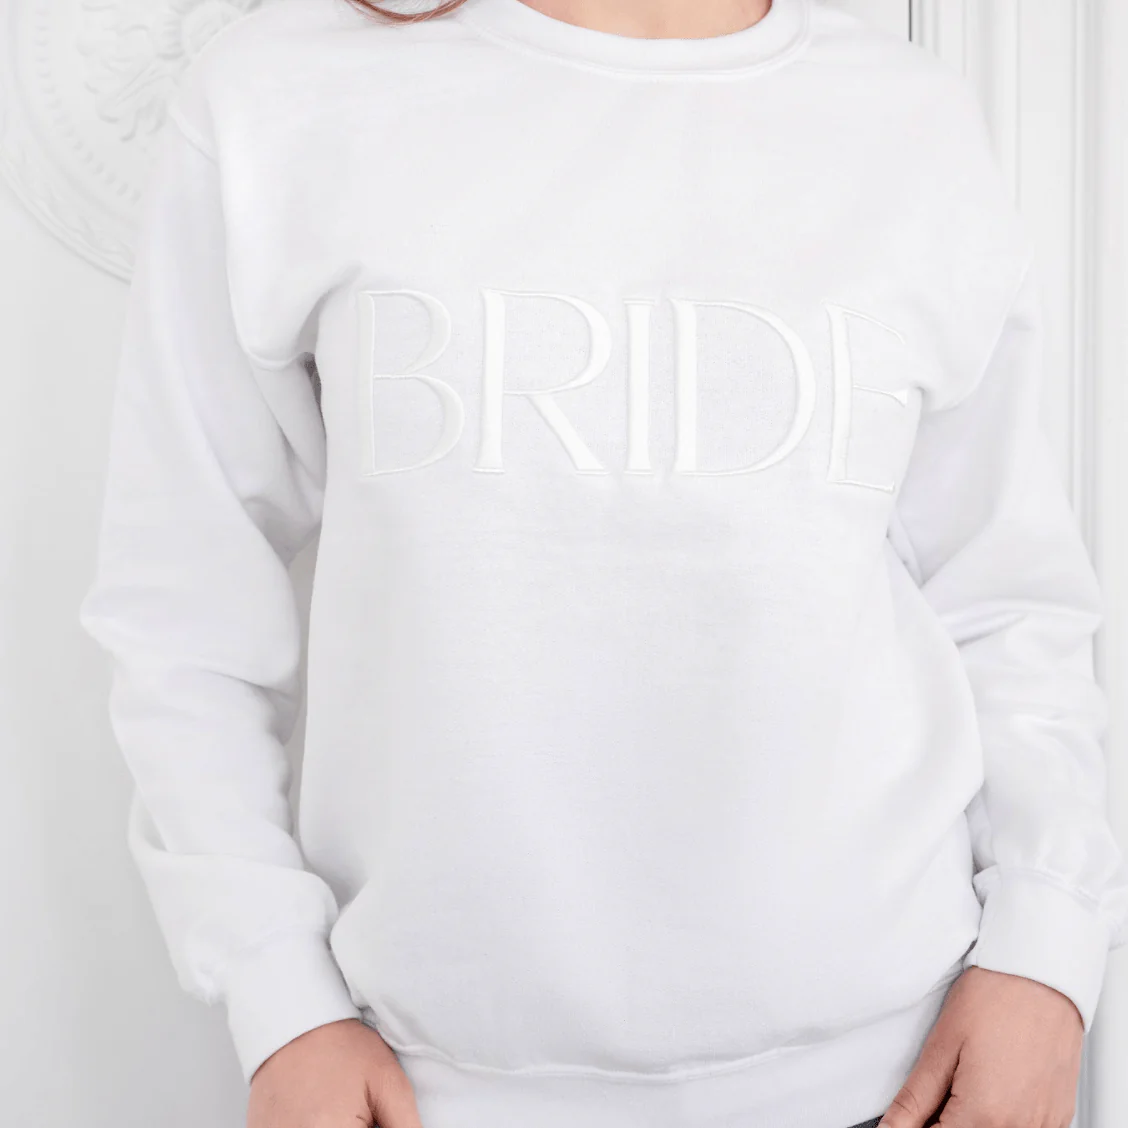 Made from a soft and comfortable 100% cotton blend, this sweatshirt features a beautiful "BRIDE" embroidery design.